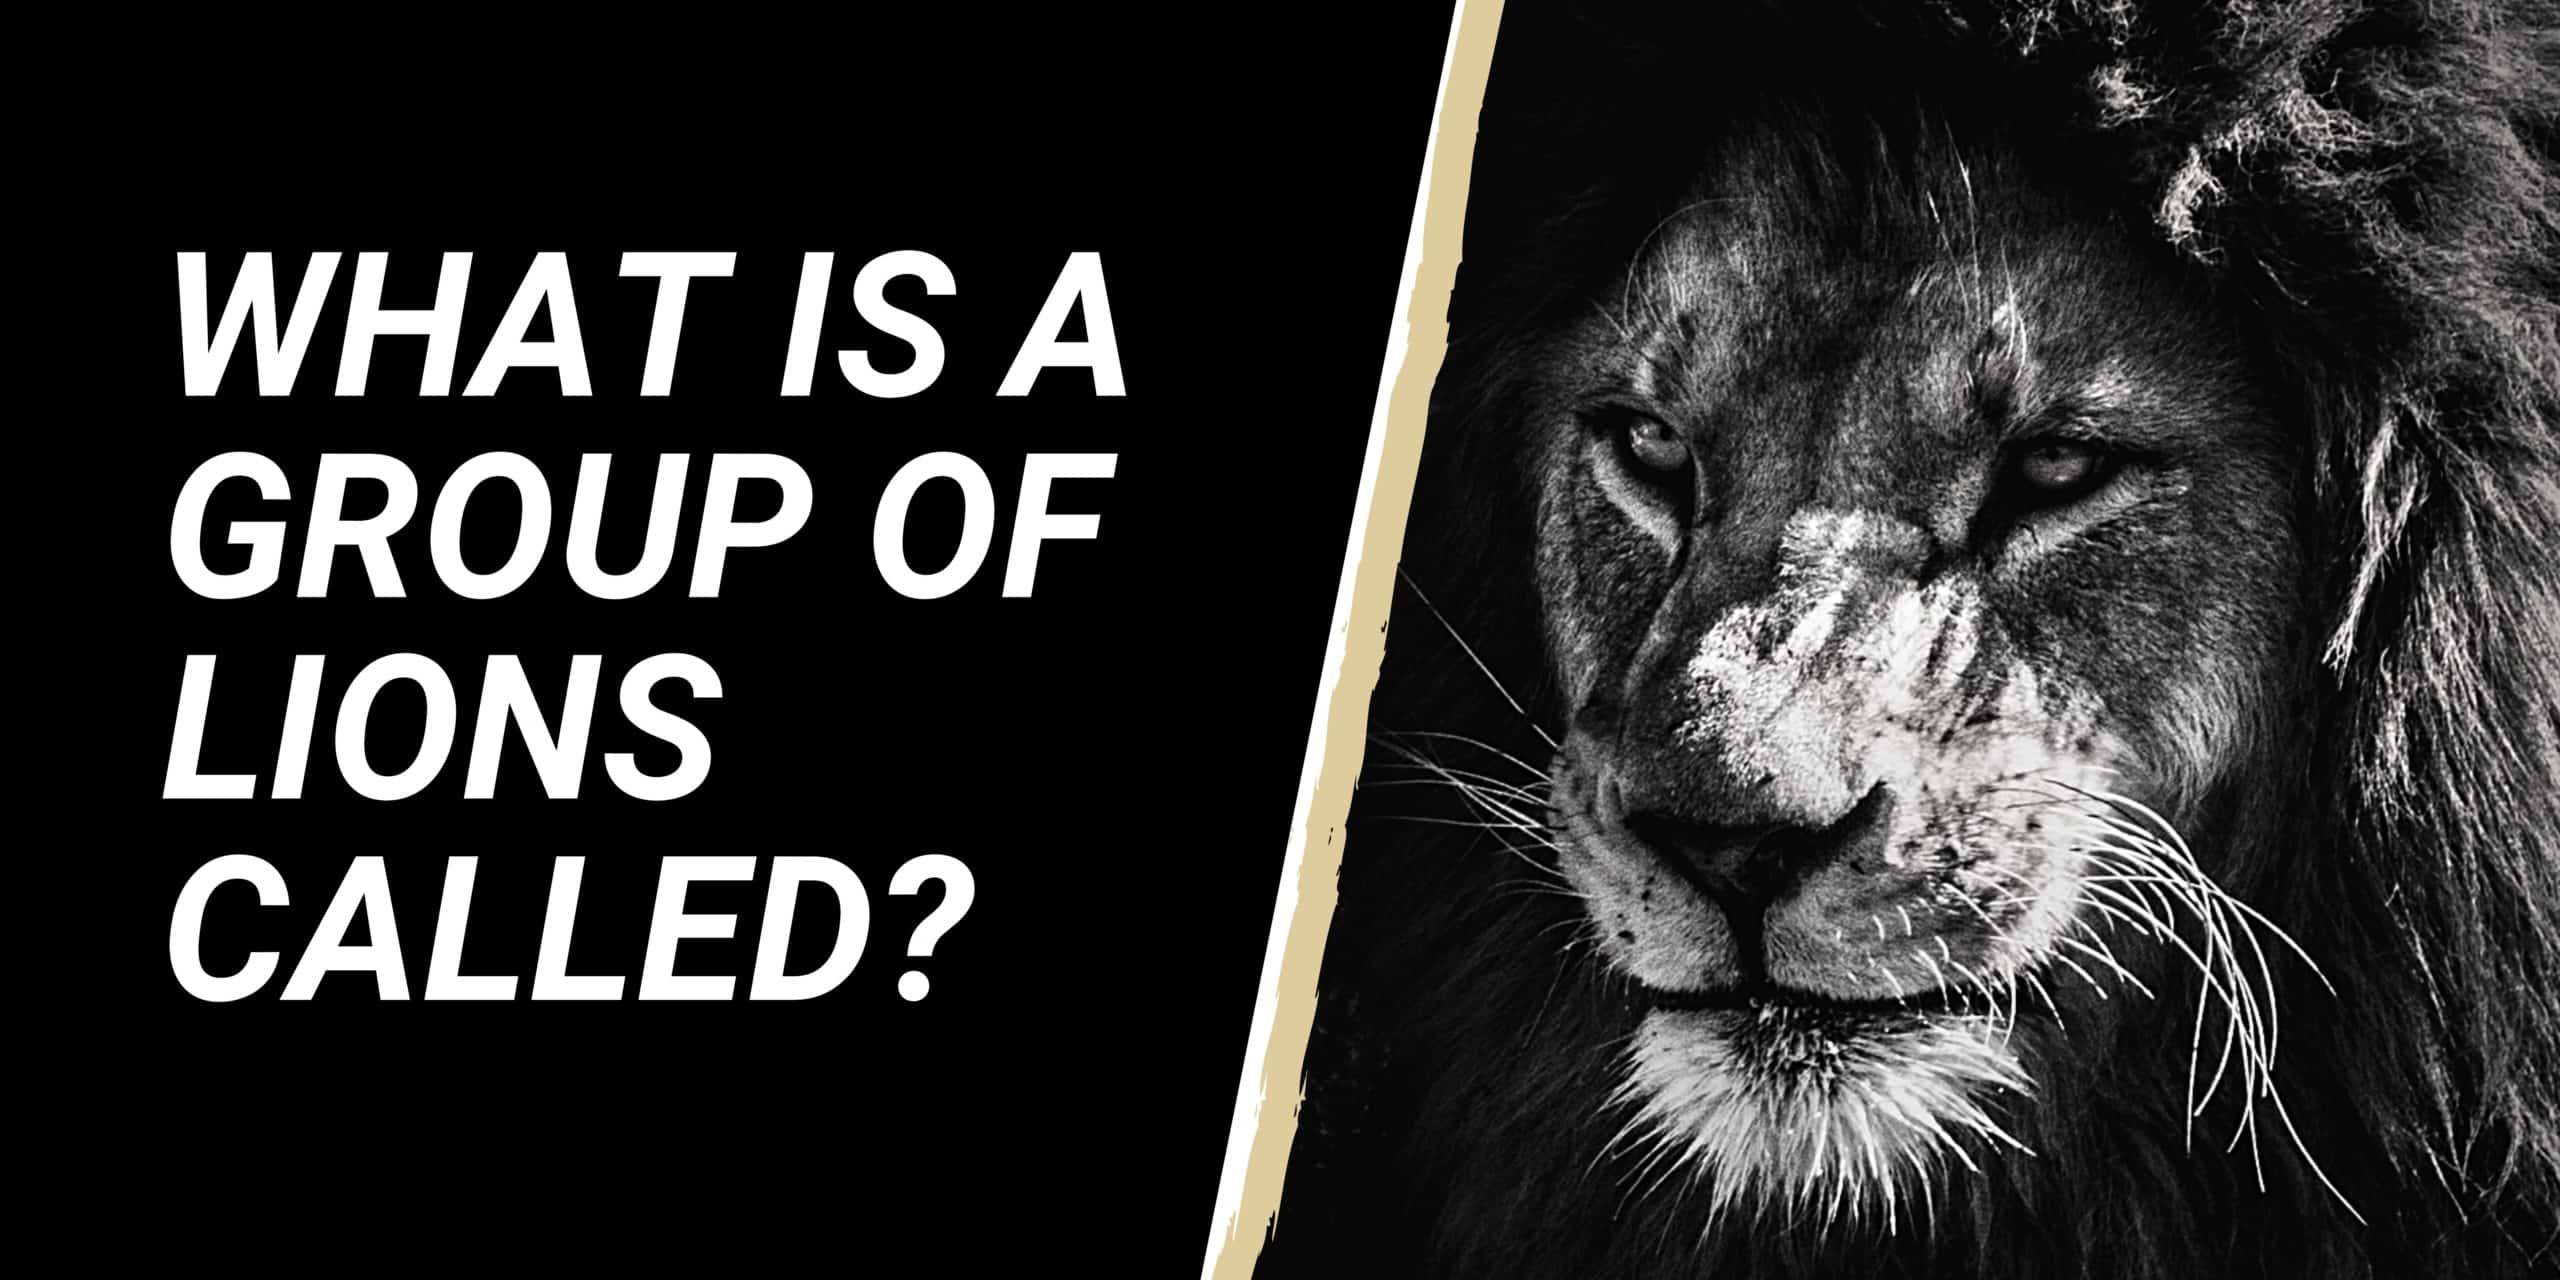 What Is a Group of Lions Called?